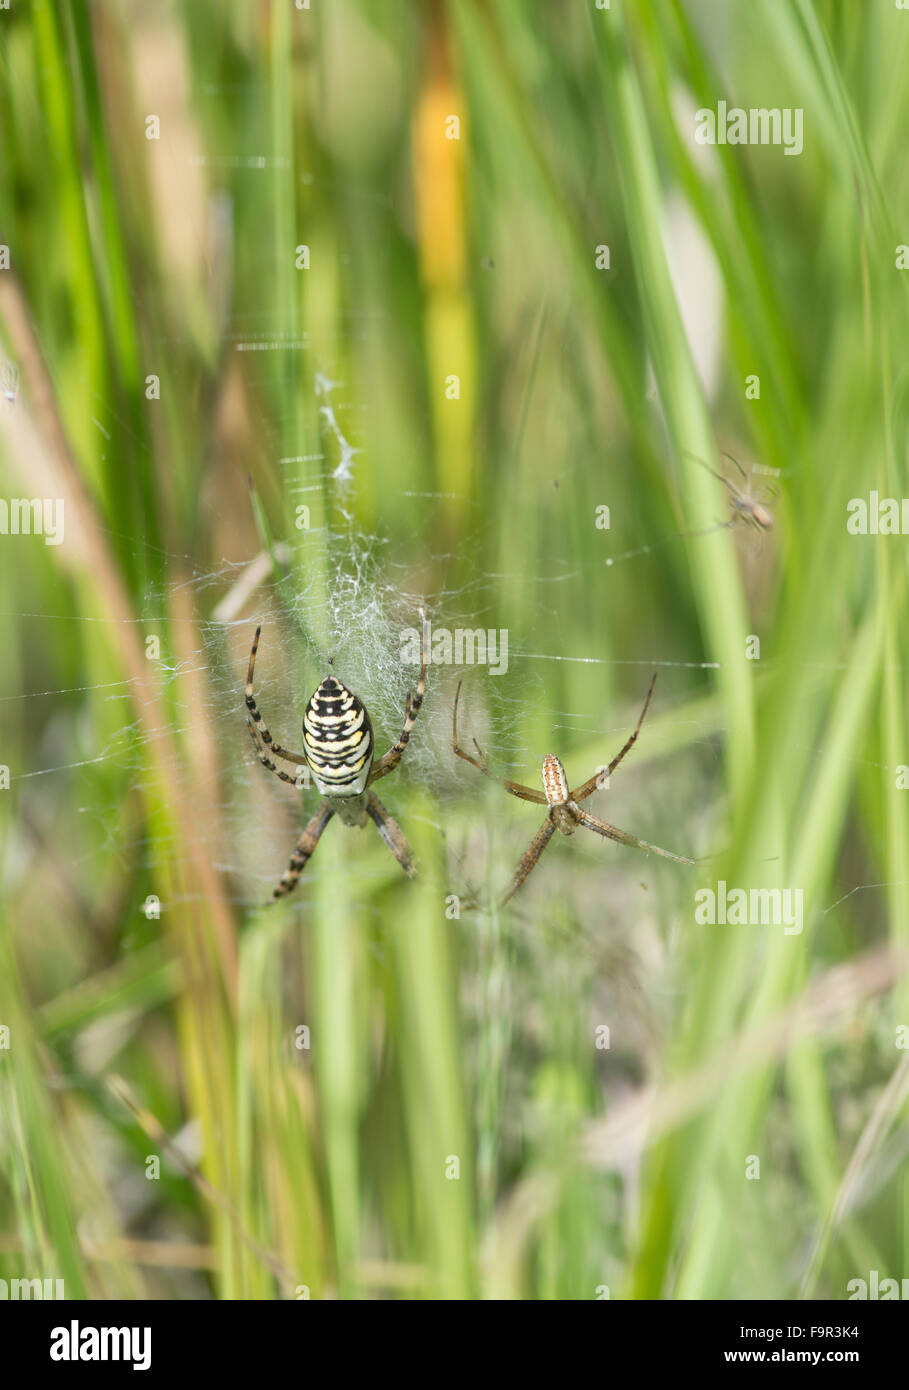 Wasp Spider: Argiope bruennichi. Surrey, UK. Female (left) and male, showing difference in size and colour Stock Photo